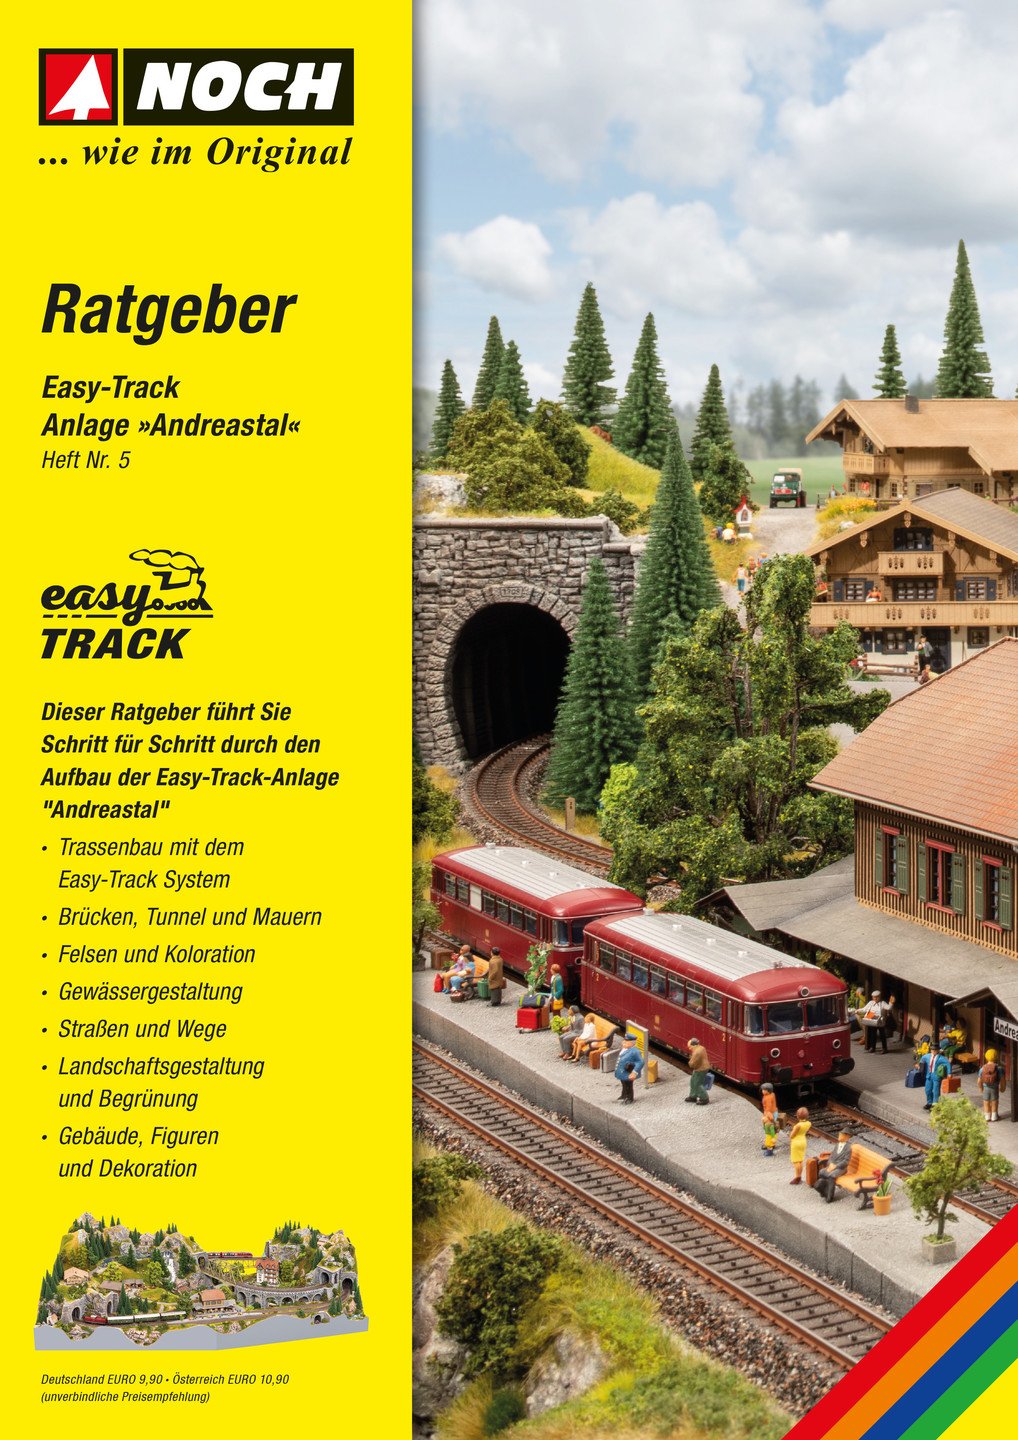 Easy-Track Railway Route Kit “Andreastal” | NOCH